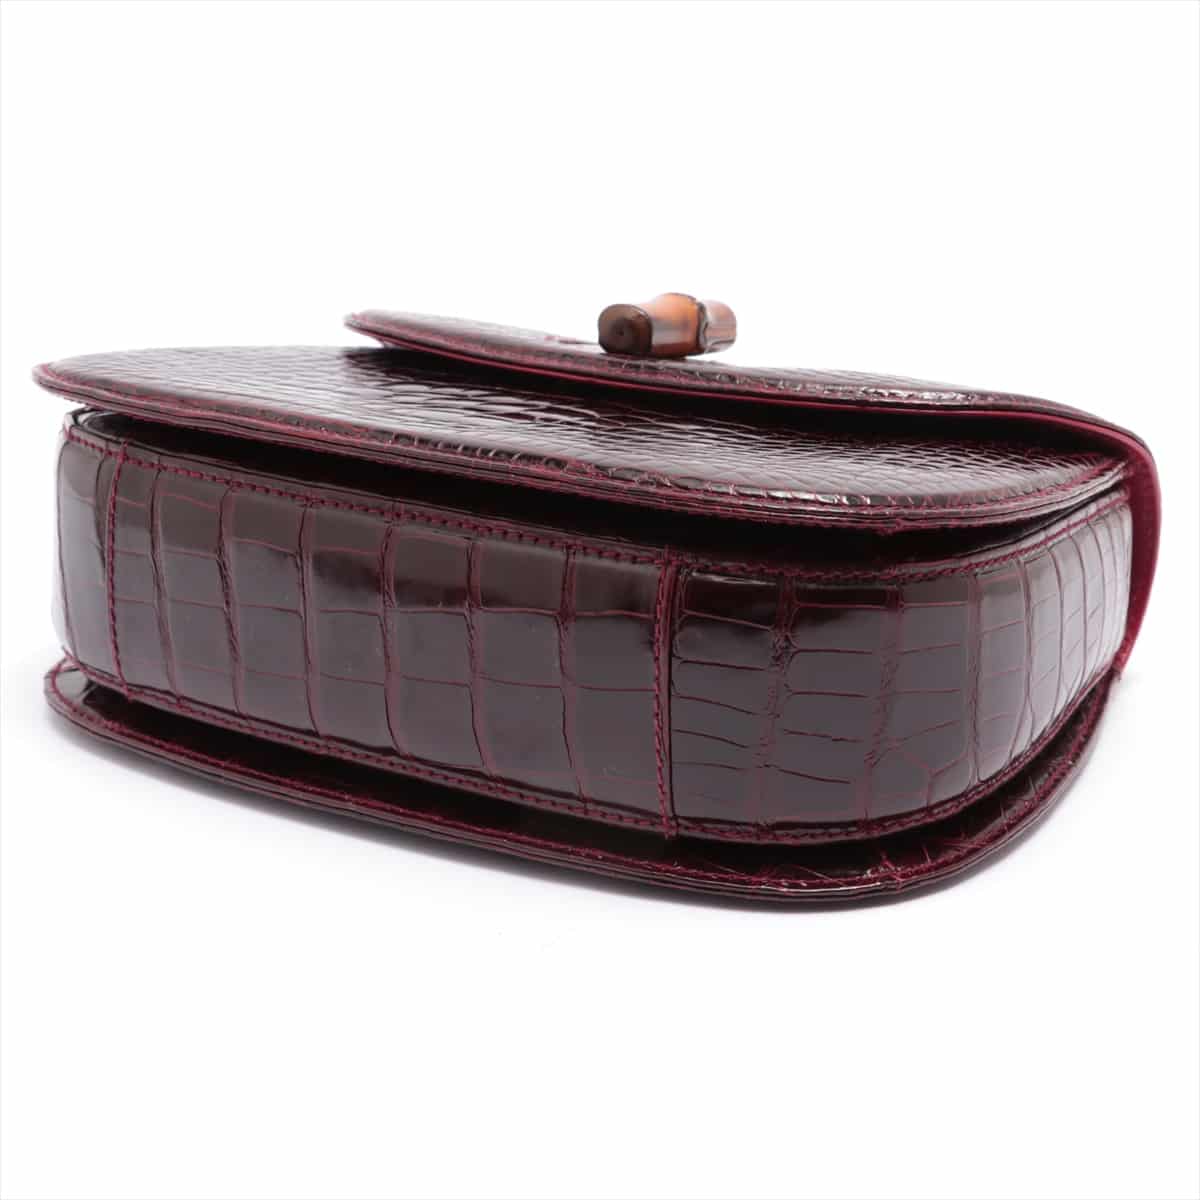 Gucci Bamboo Crocodile 2way shoulder bag Bordeaux 002 20460 Comes with a mirror pass case